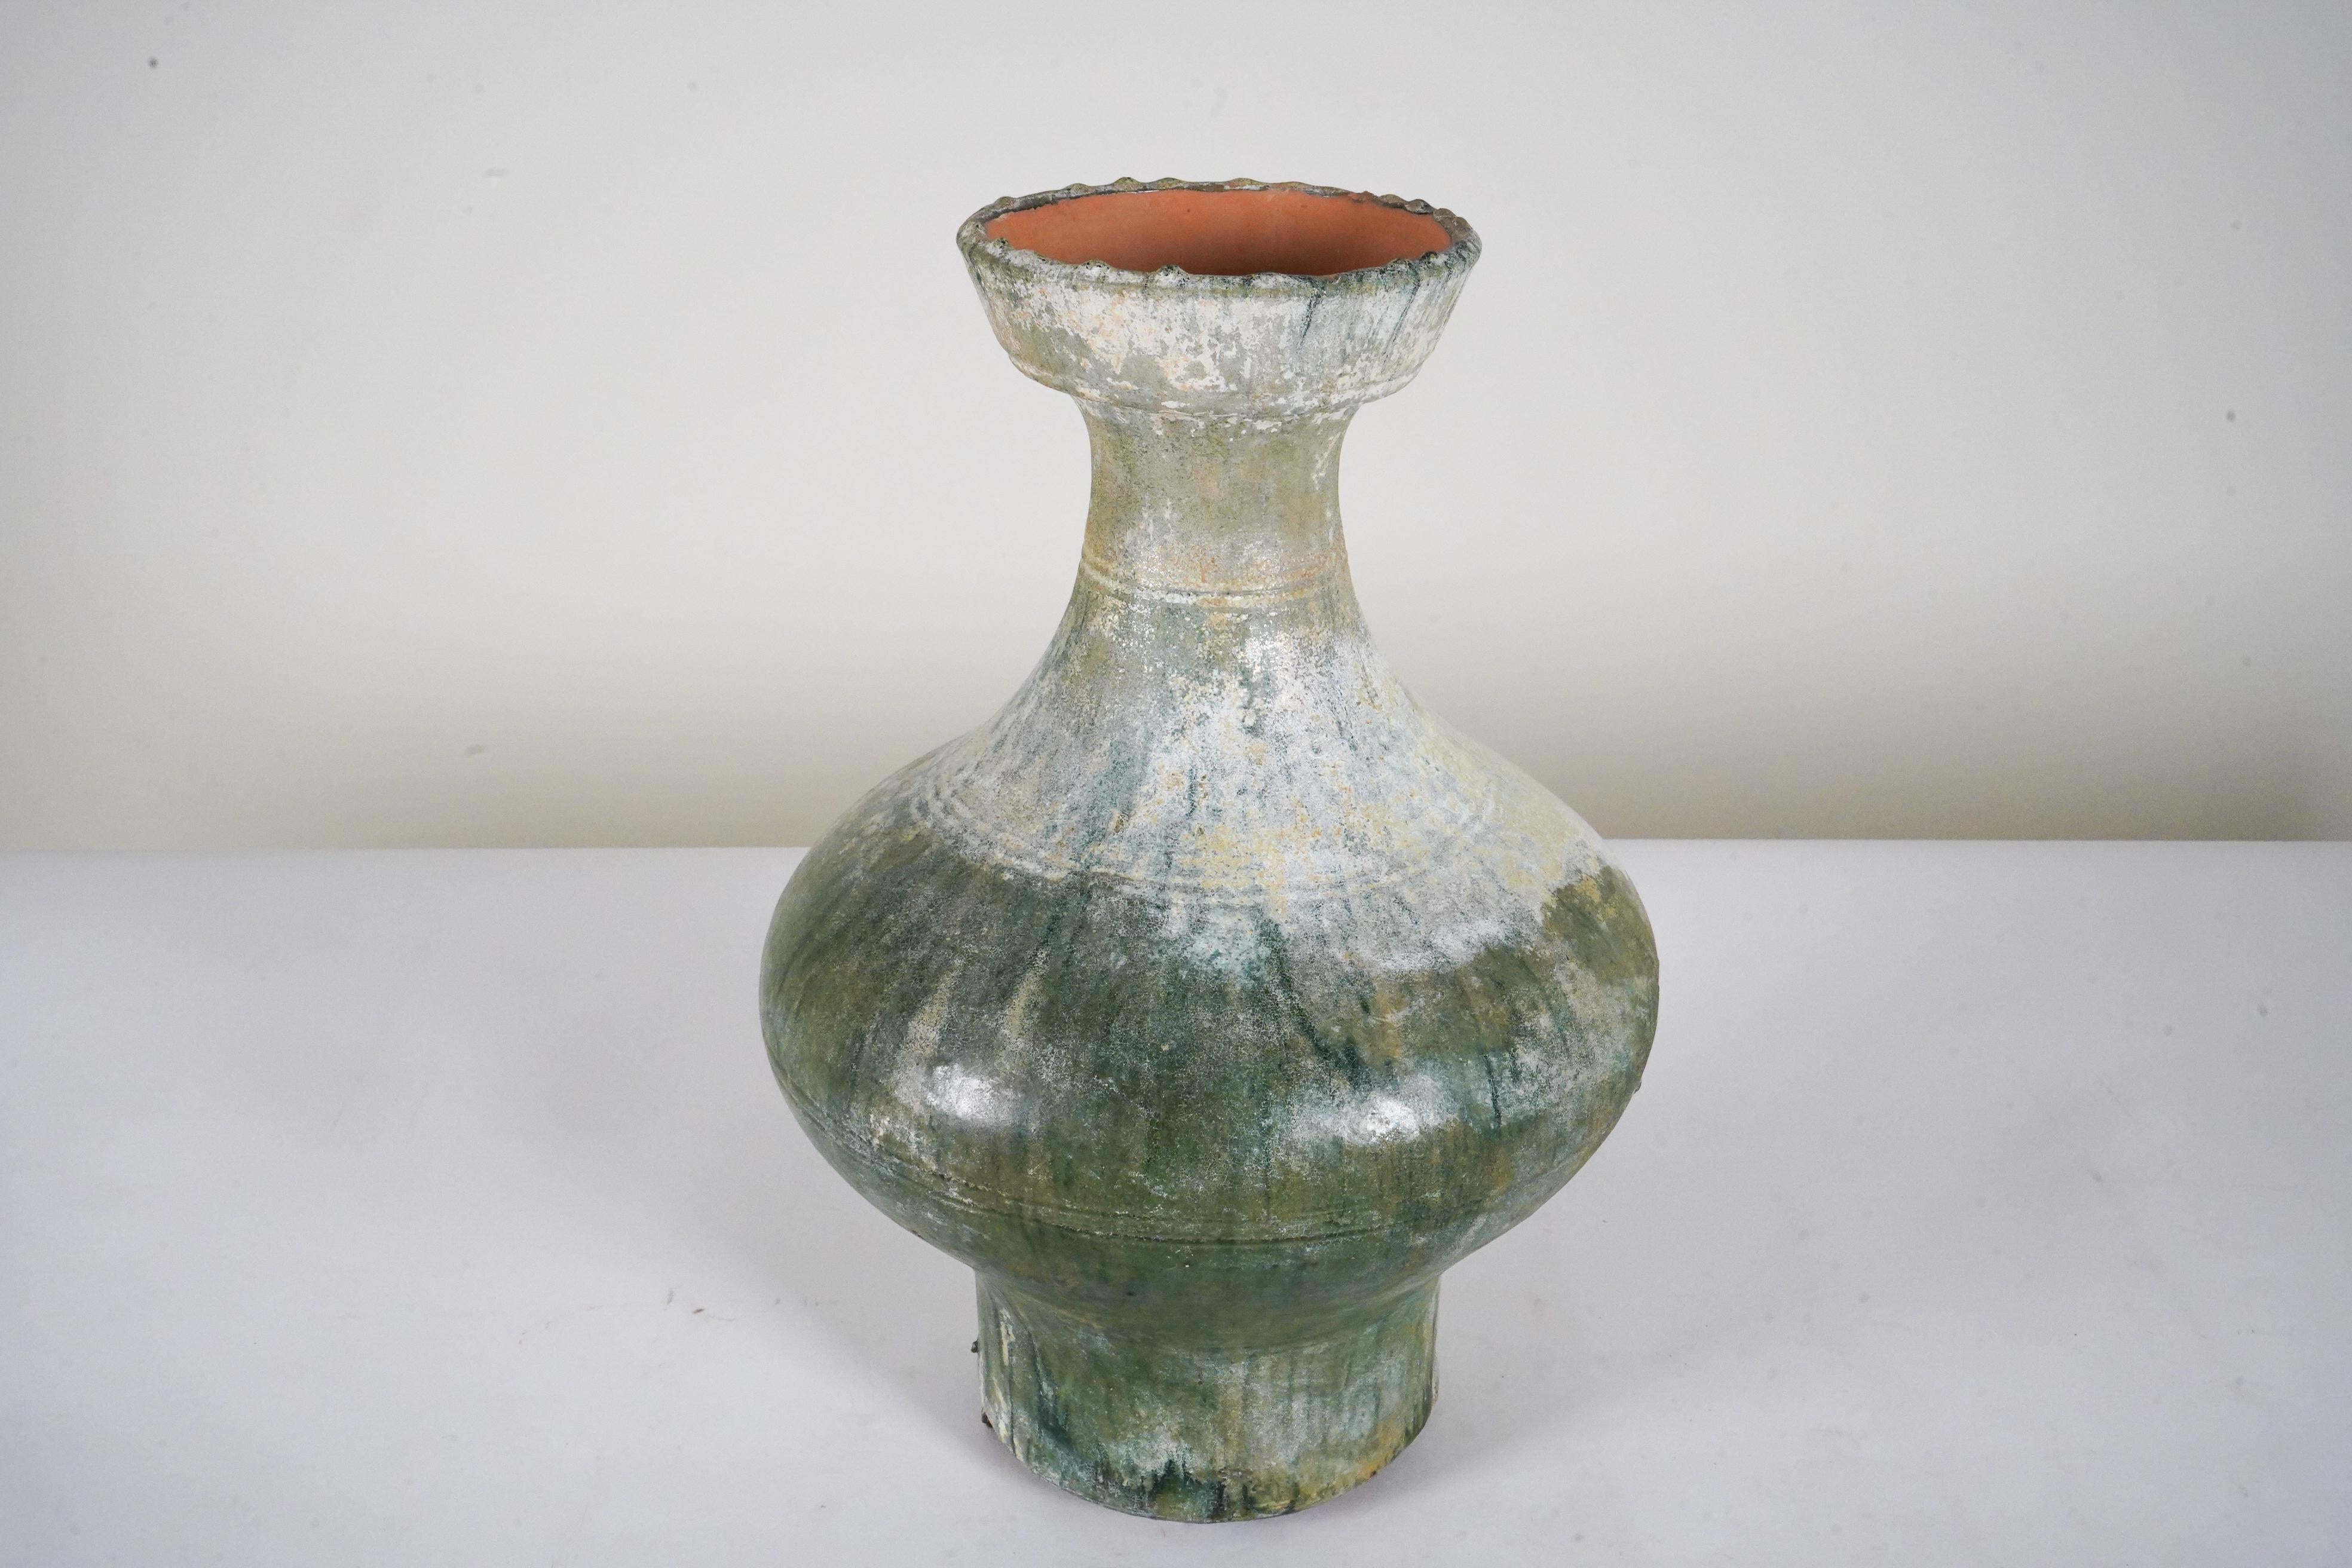 This is a fine example of a Han hu wine storage vessel, buried for the afterlife. The compressed globular body narrows sharply to a slender waisted neck, covered with a dark green lead glaze that has developed a silvery patina due to long-term